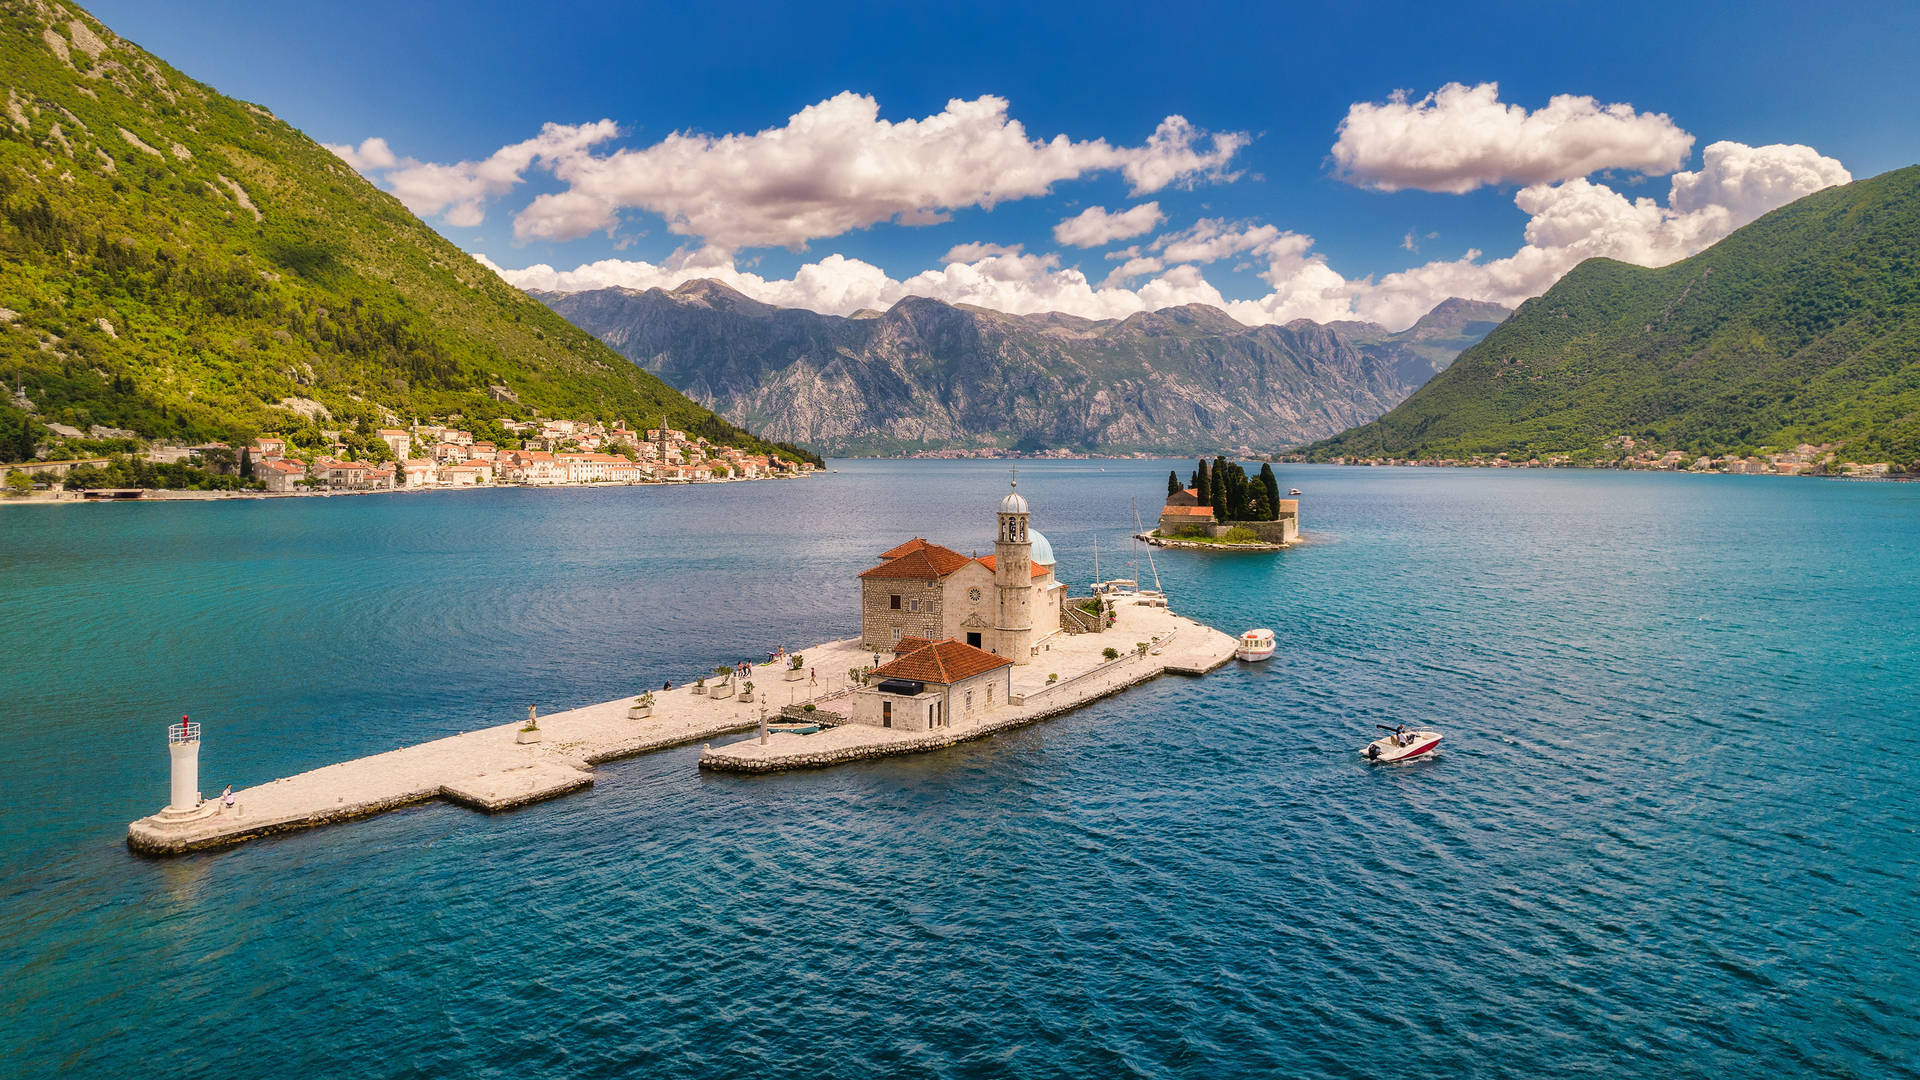 Breathtaking View Of The Iconic Our Lady Of The Rocks In Kotor Bay. Wallpaper